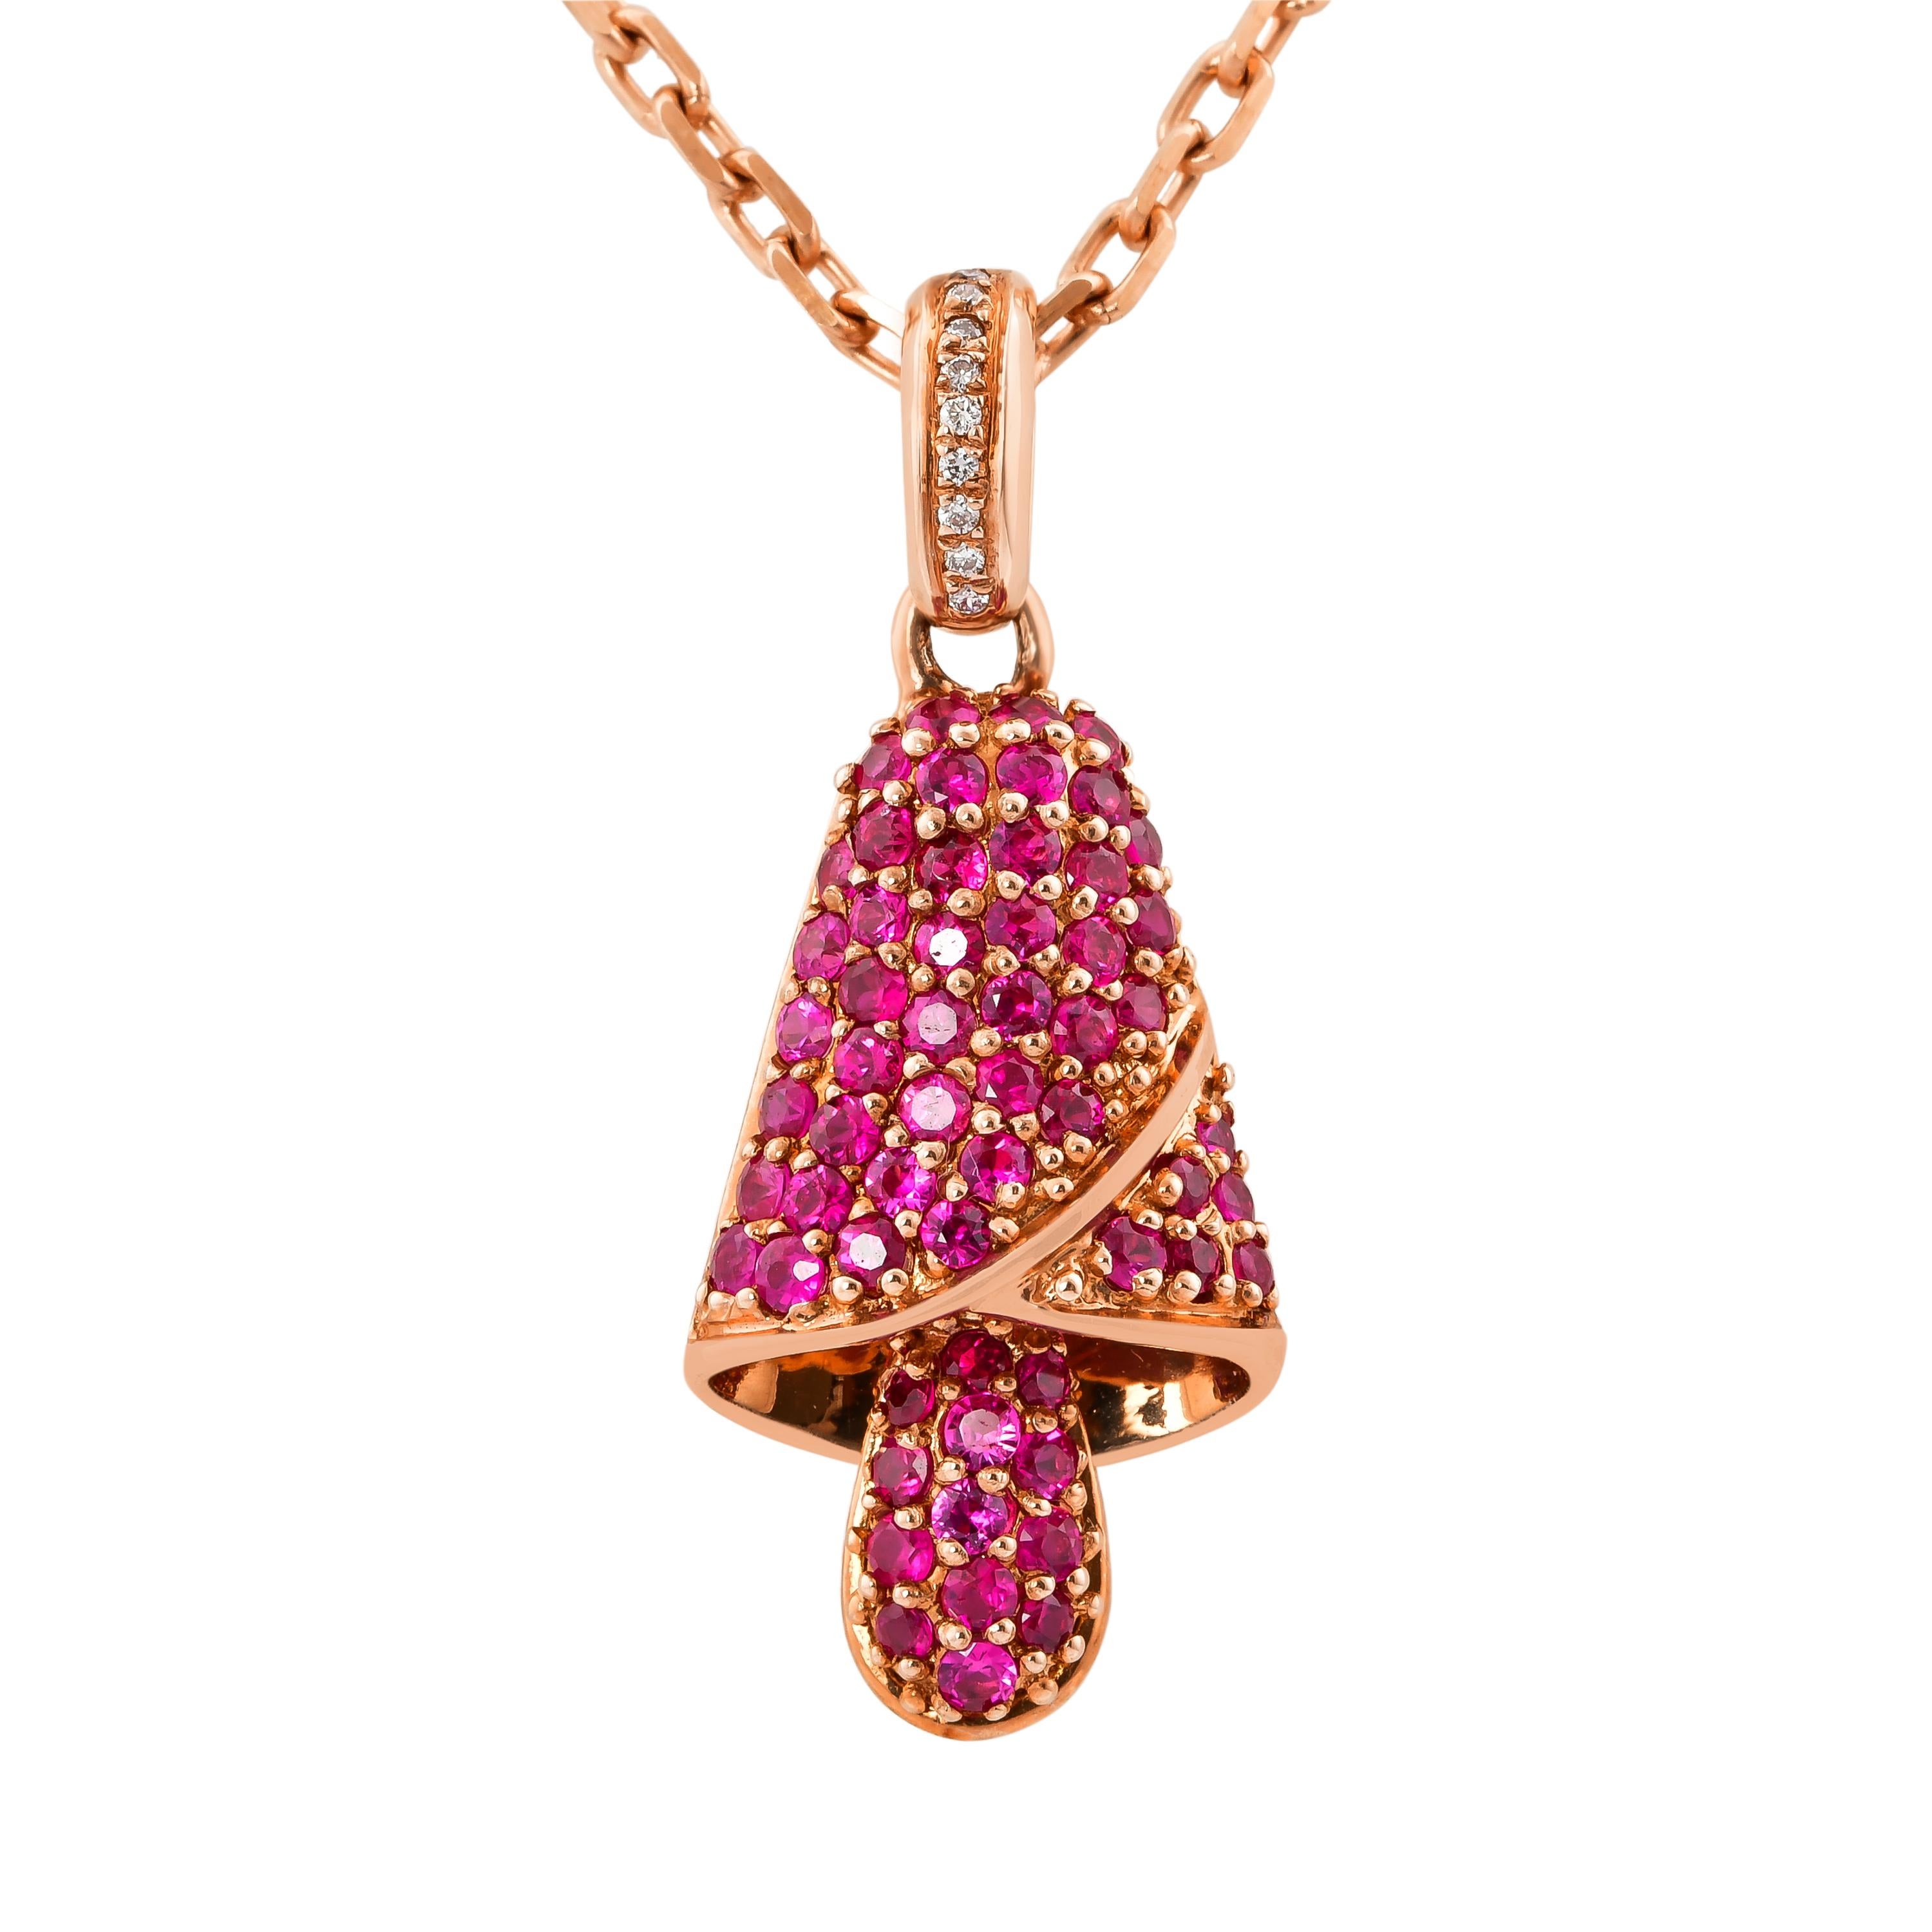 An exclusive collection of designer and unique cocktail pendants by Sunita Nahata Fine Design. 

Ruby Cocktail Pendant in 14 Karat Rose Gold

Ruby: 0.15 carat, 1.50 Size, Round Shape.
Ruby: 0.66 carat, 1.60 Size, Round Shape.
Ruby: 0.495 carat, 1.70